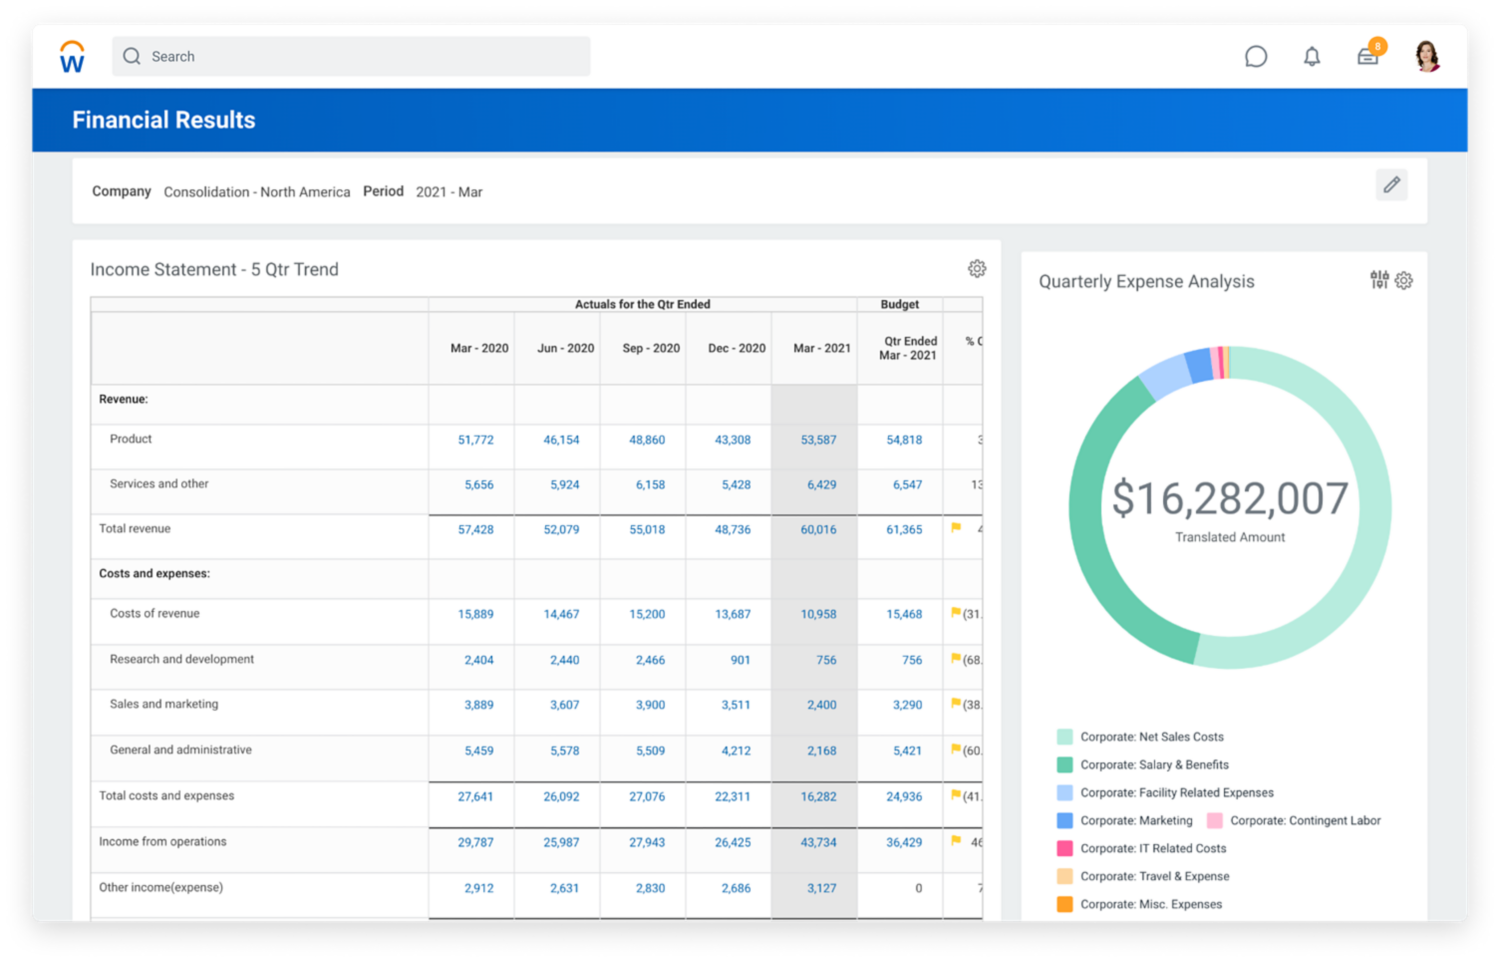 Financial accounting results dashboard showing income statement and quarterly expense analysis.